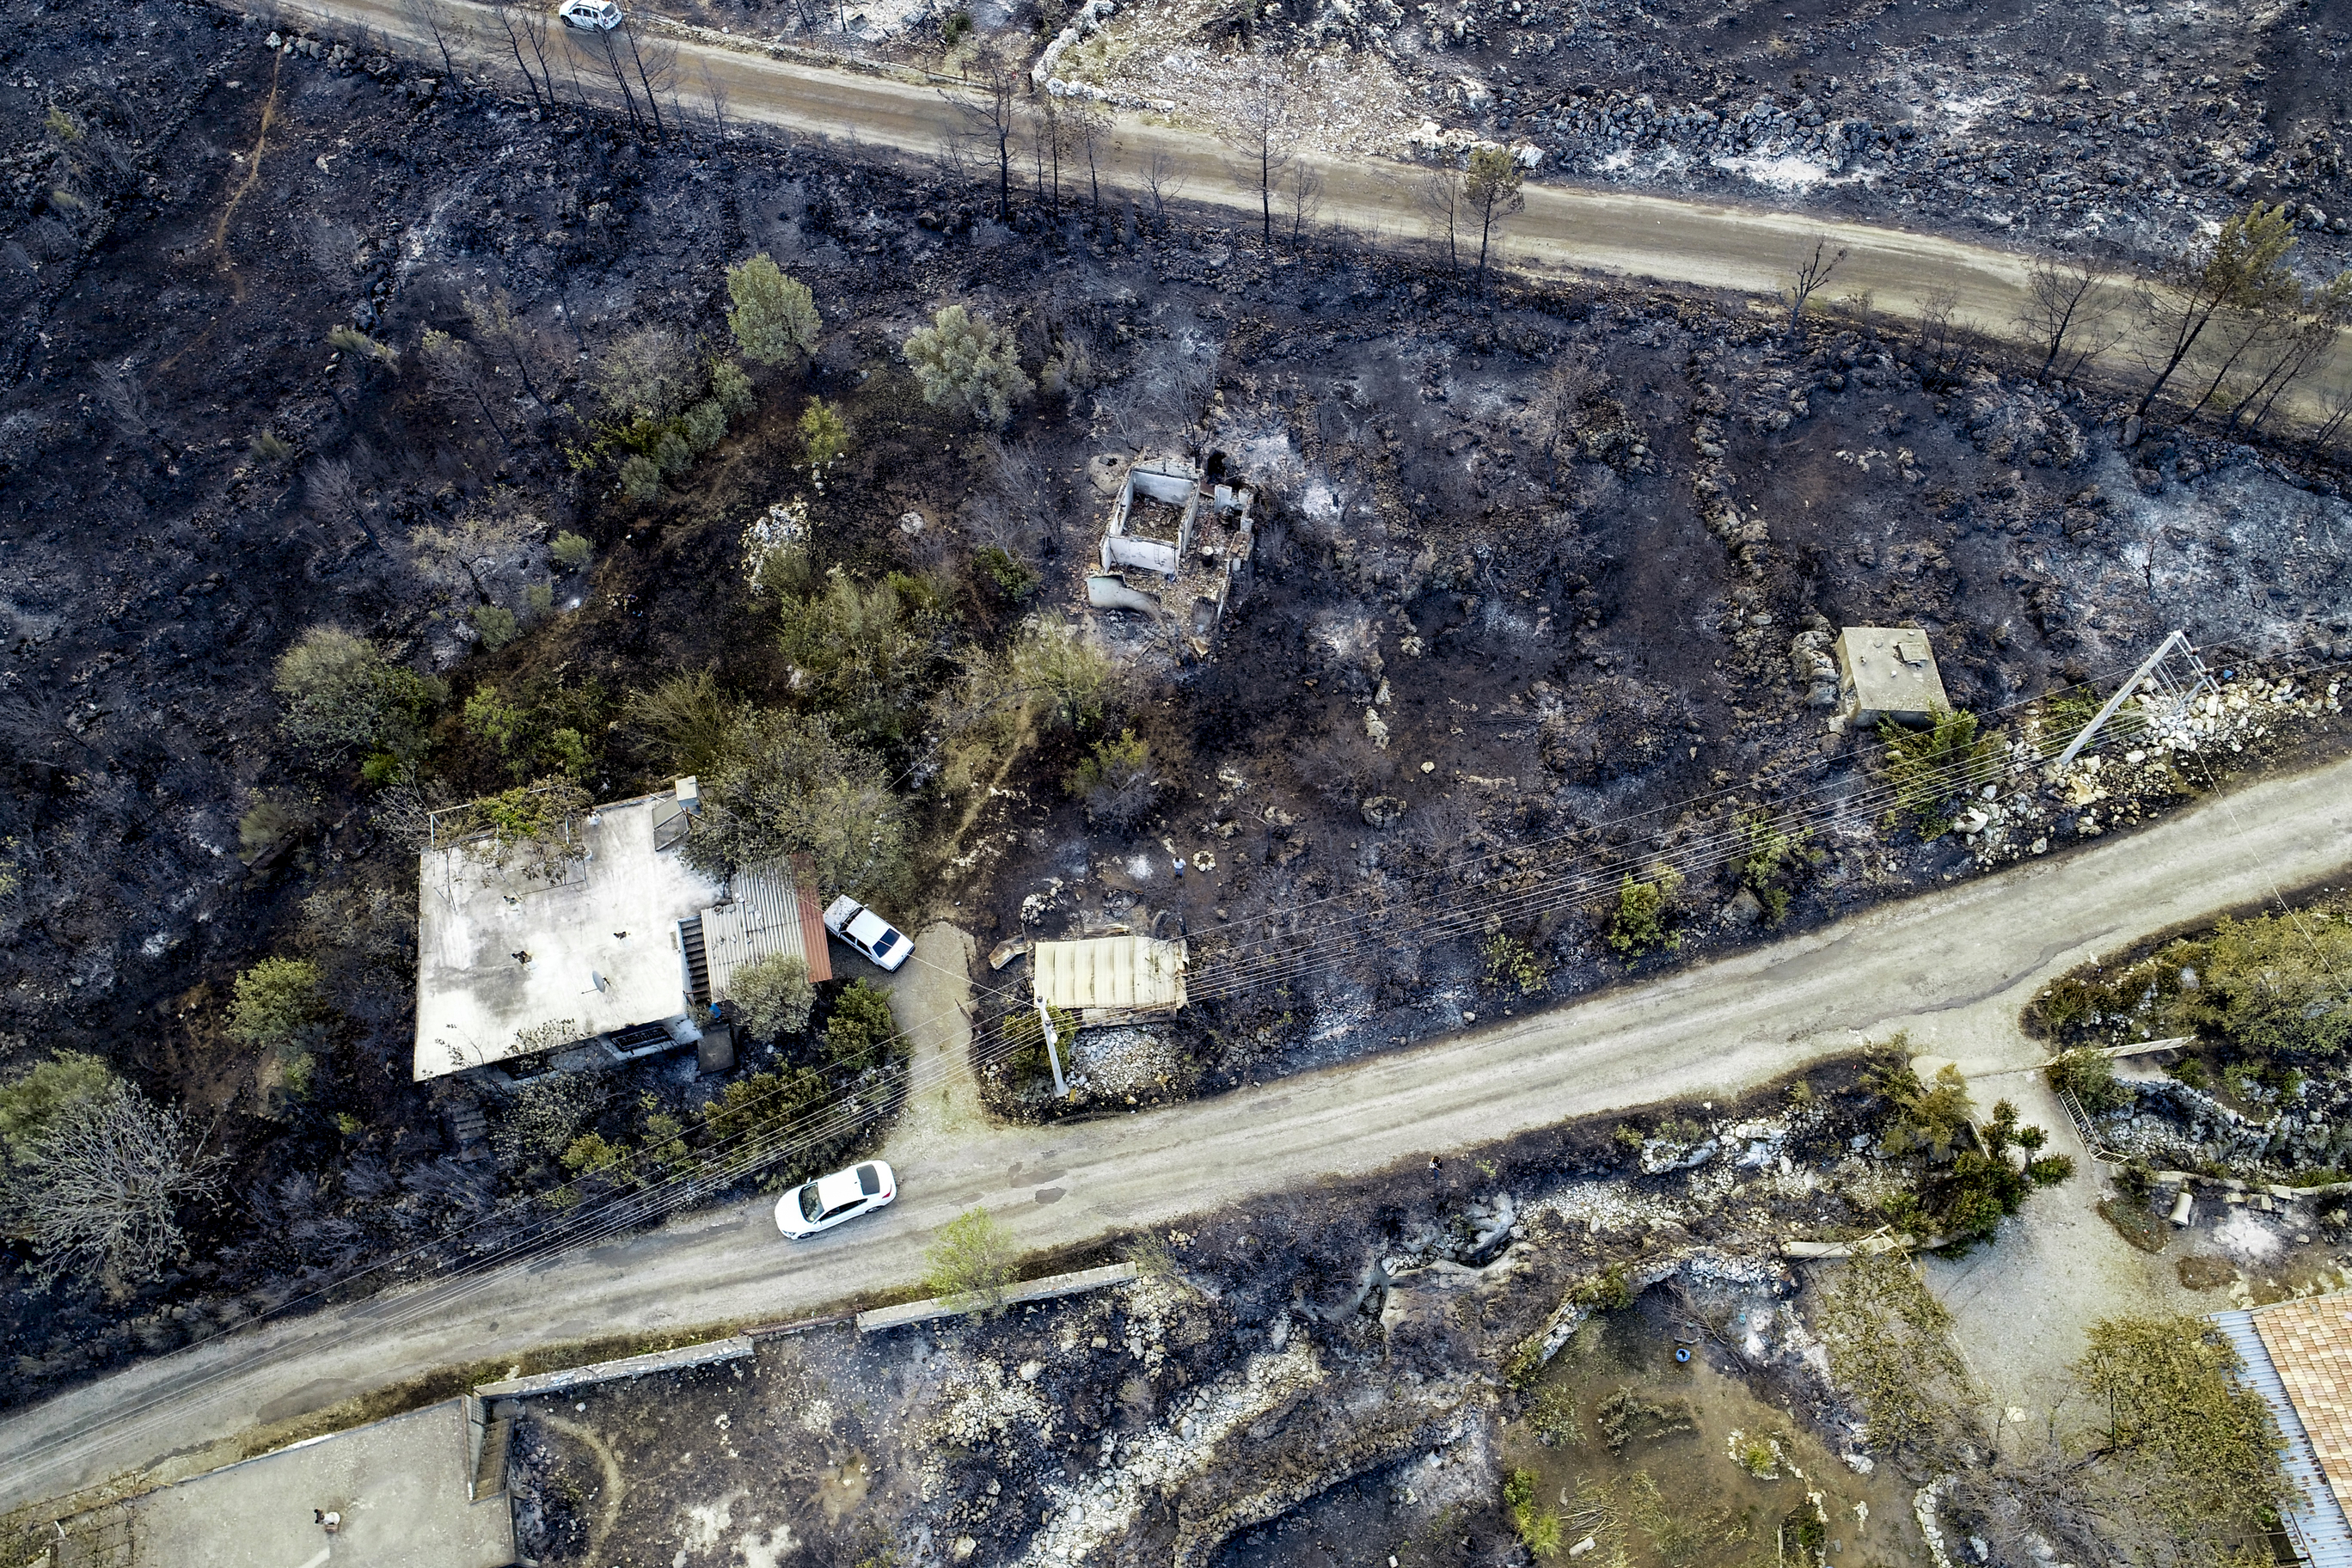 Aftermath of forest fire in Turkey's Antalya